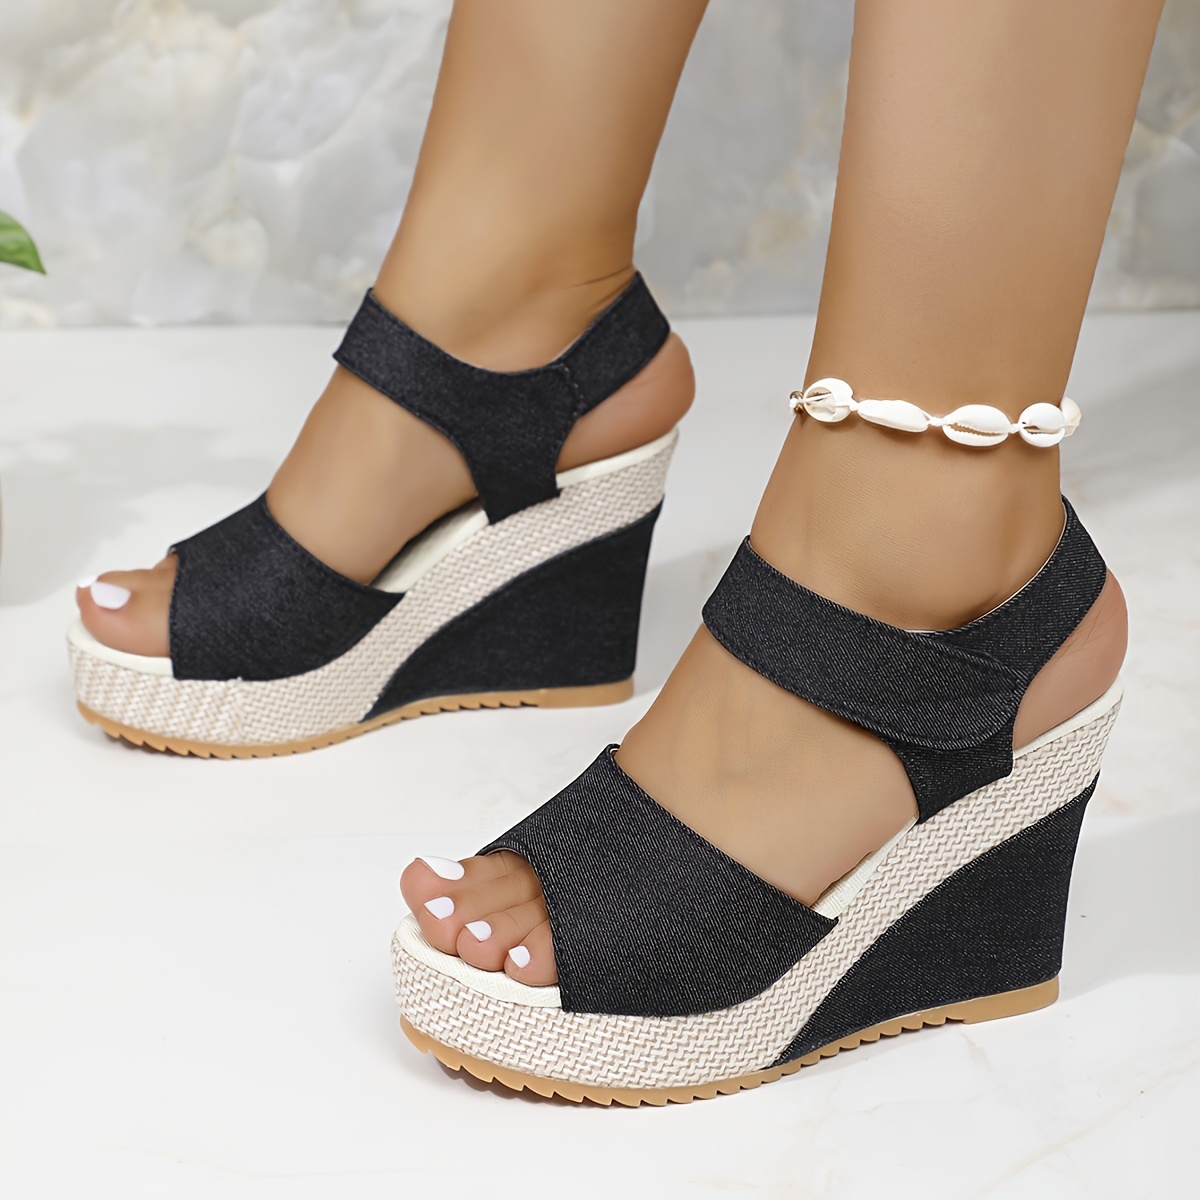 

Women's Fashion Wedges Sandals, Platform Casual Summer Shoes With Adjustable Band, Comfortable High Heel Design For Daily Wear